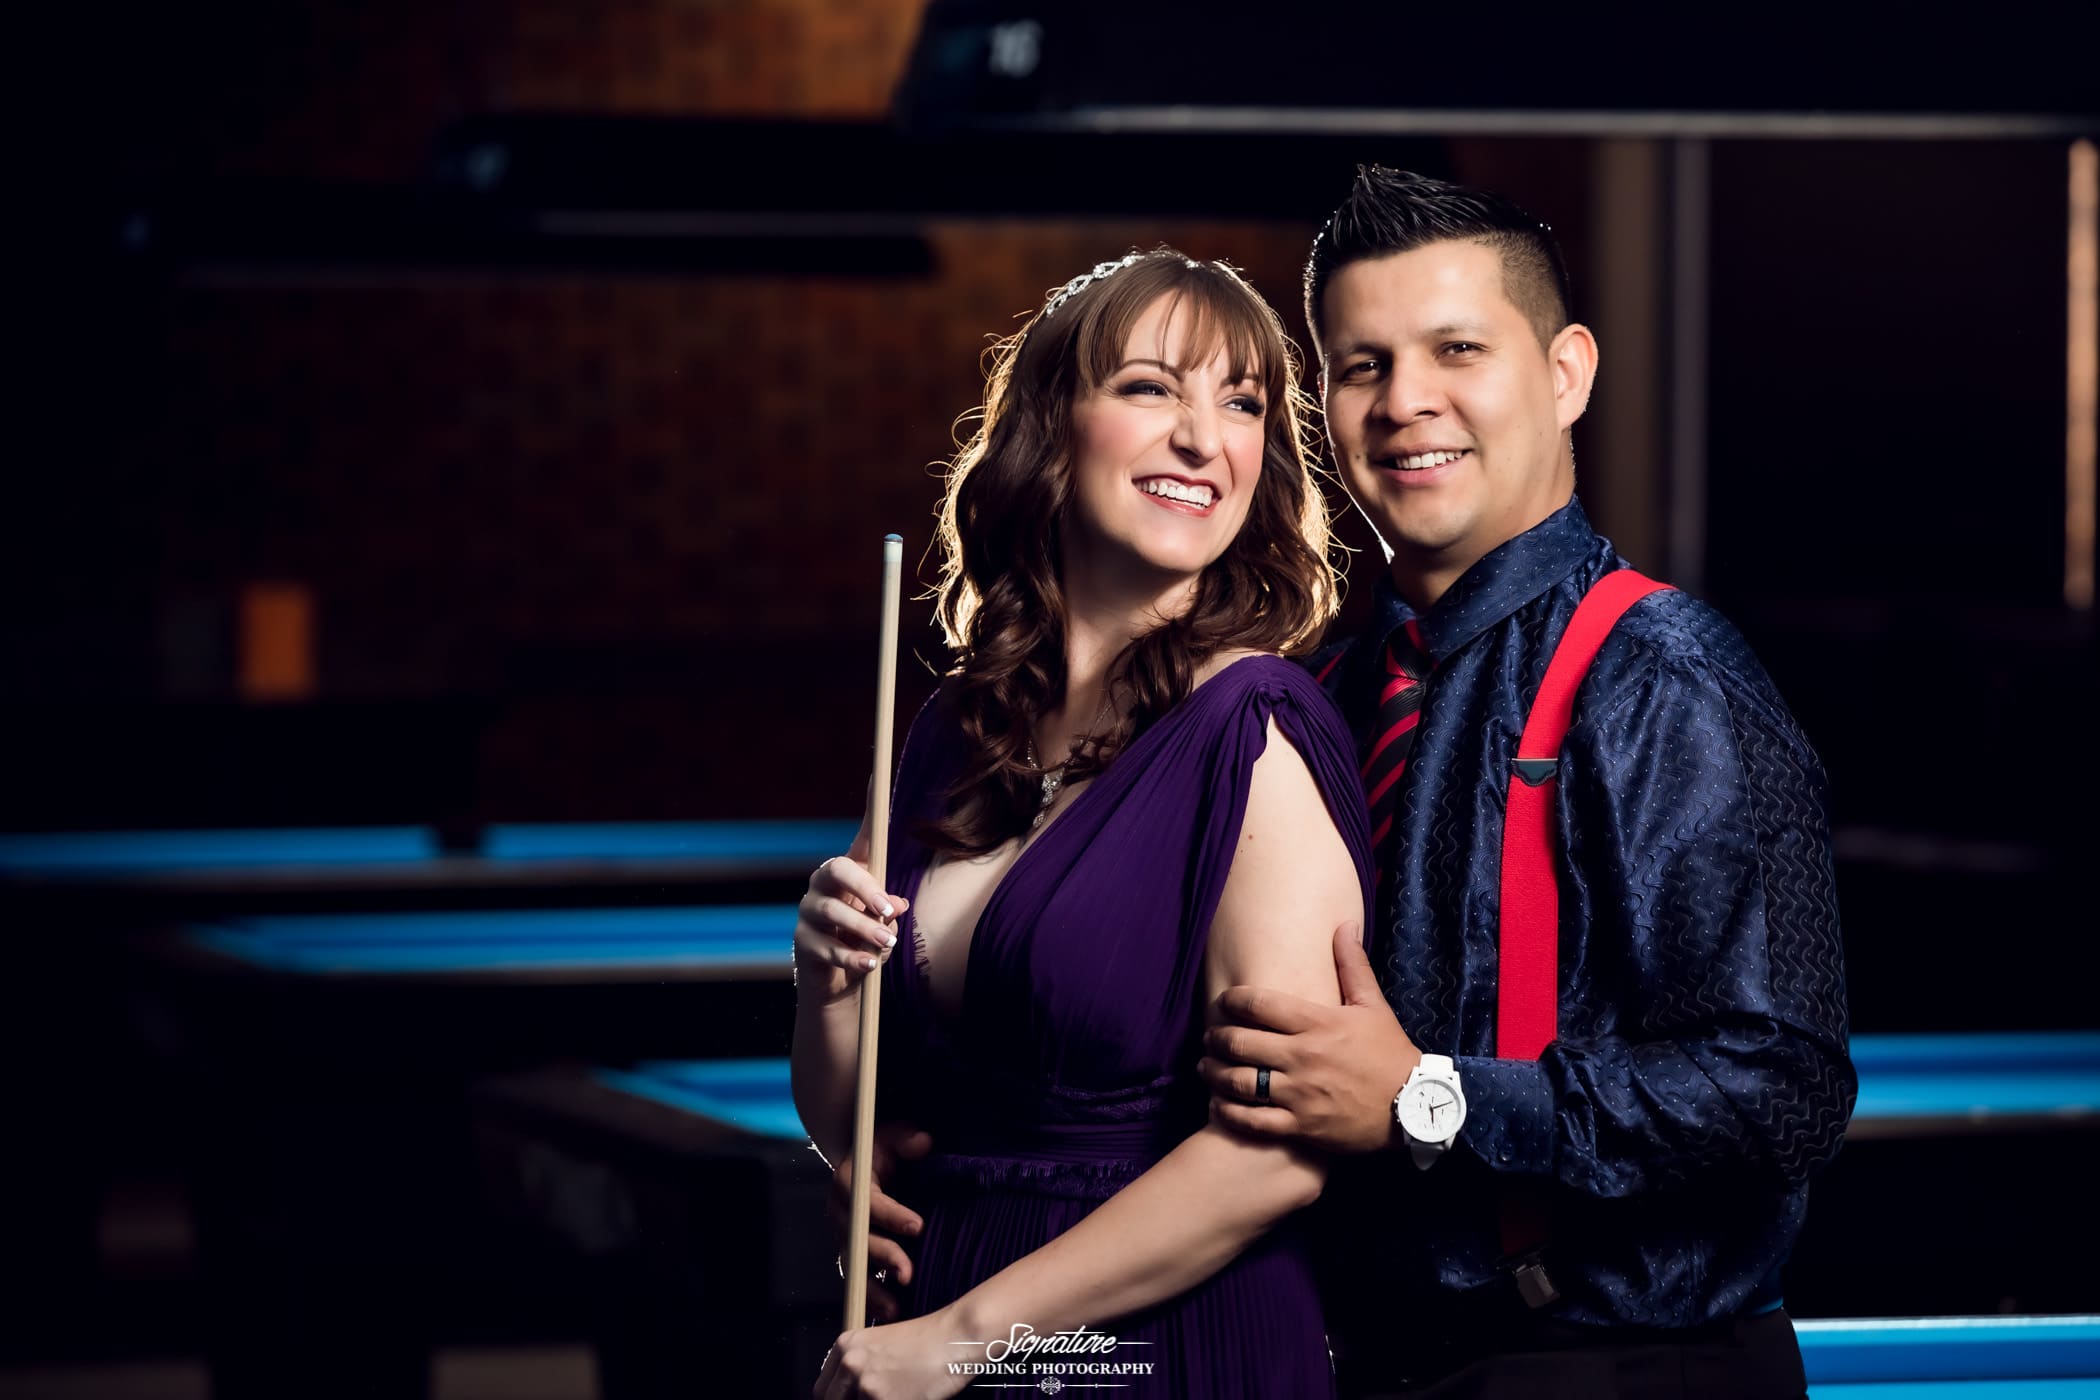 Couple smiling with billiards cue stick